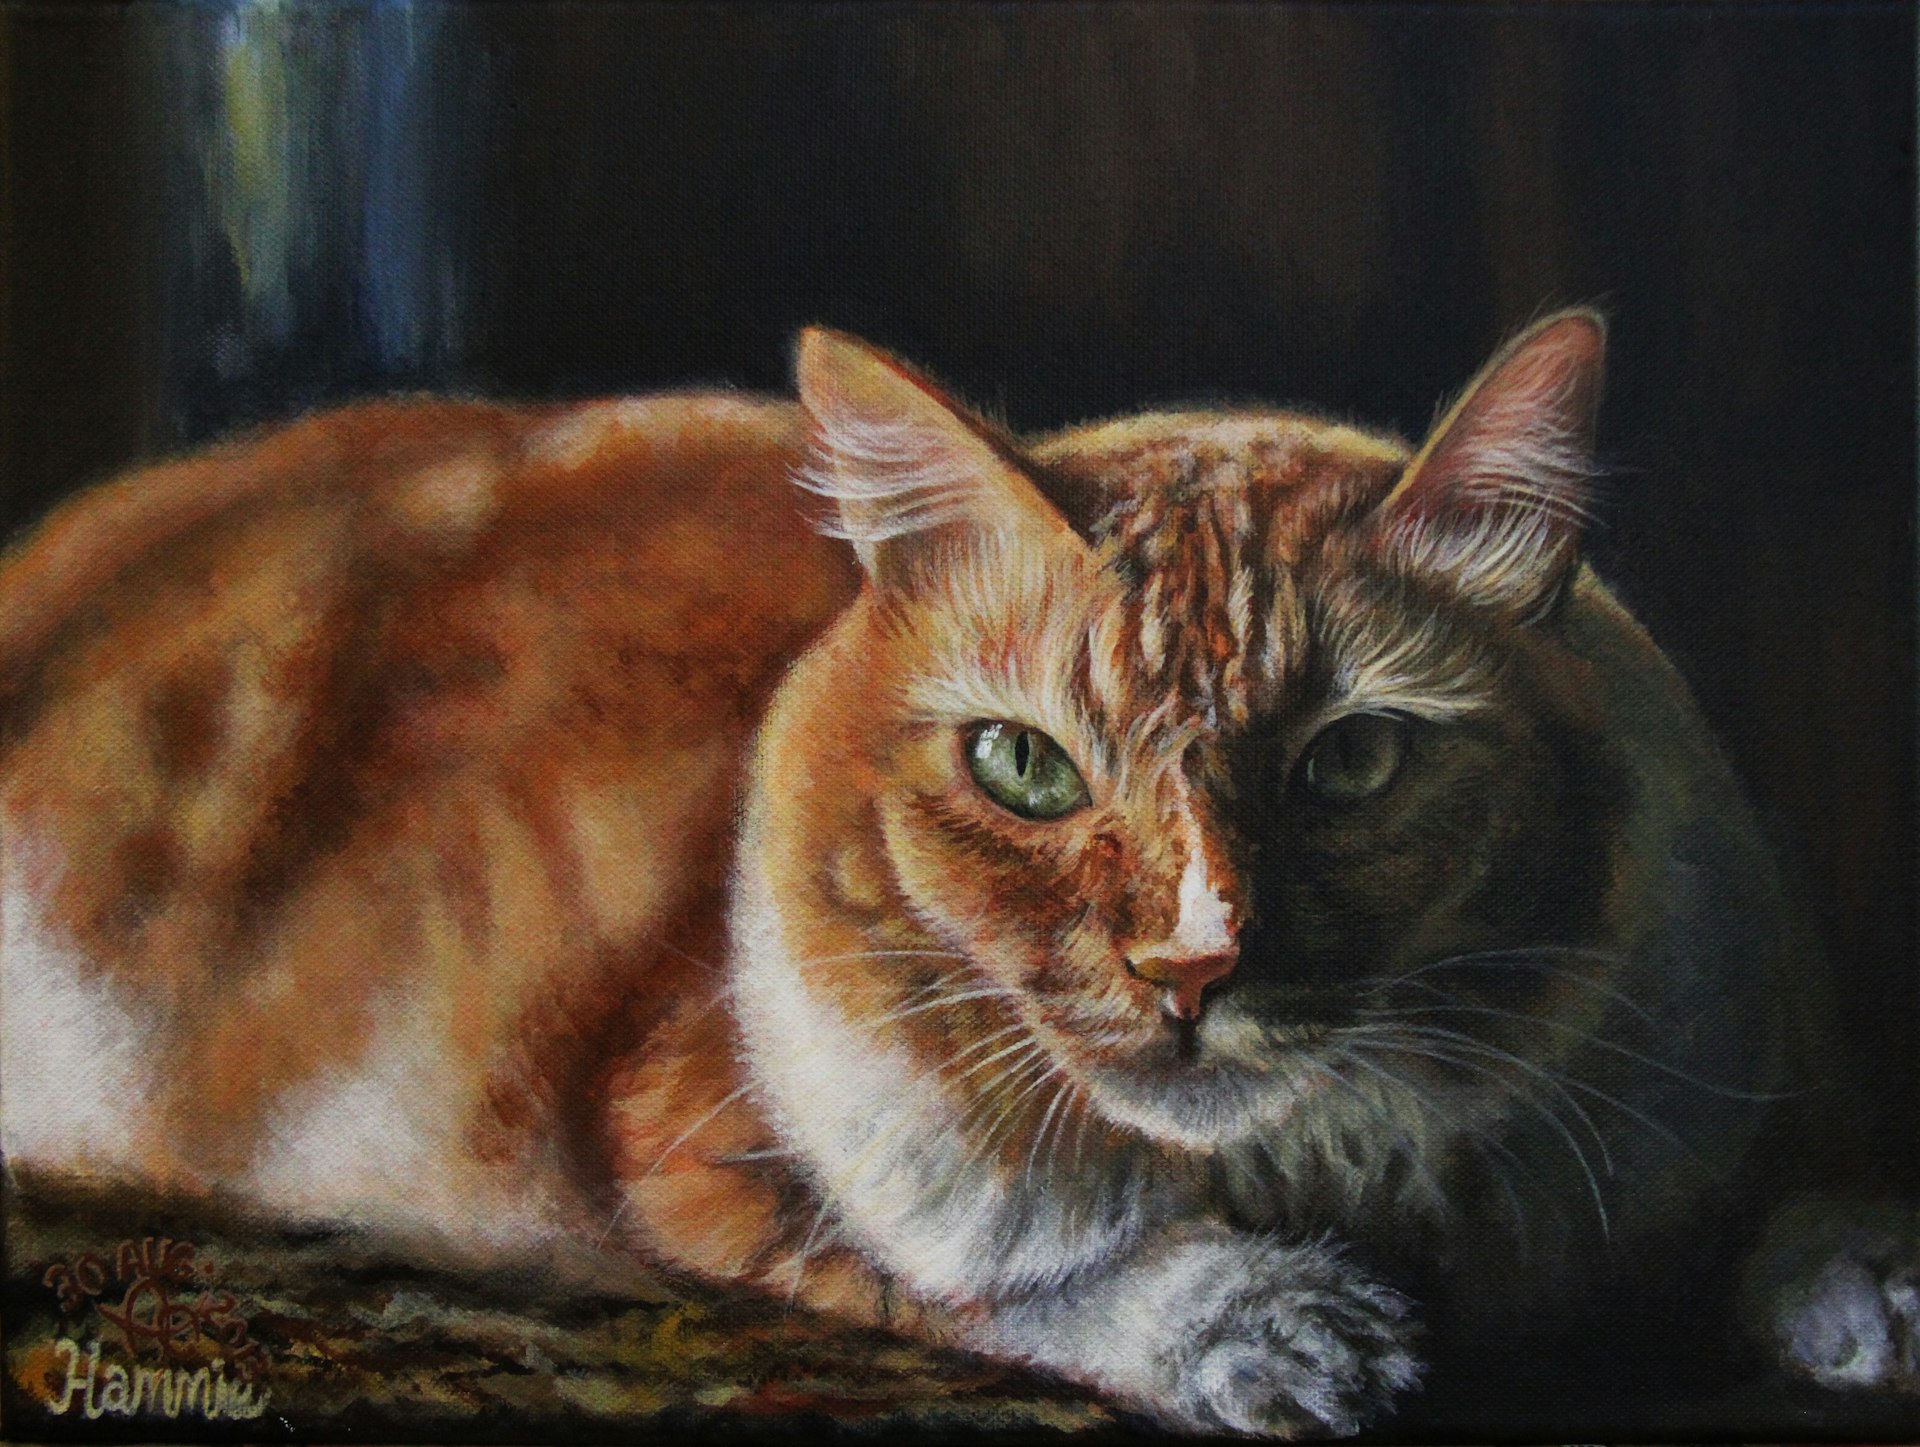 Acrylic painting of a maine coone cat, sitting on all fours on a table in dramatic lighting and looking straight at the camera